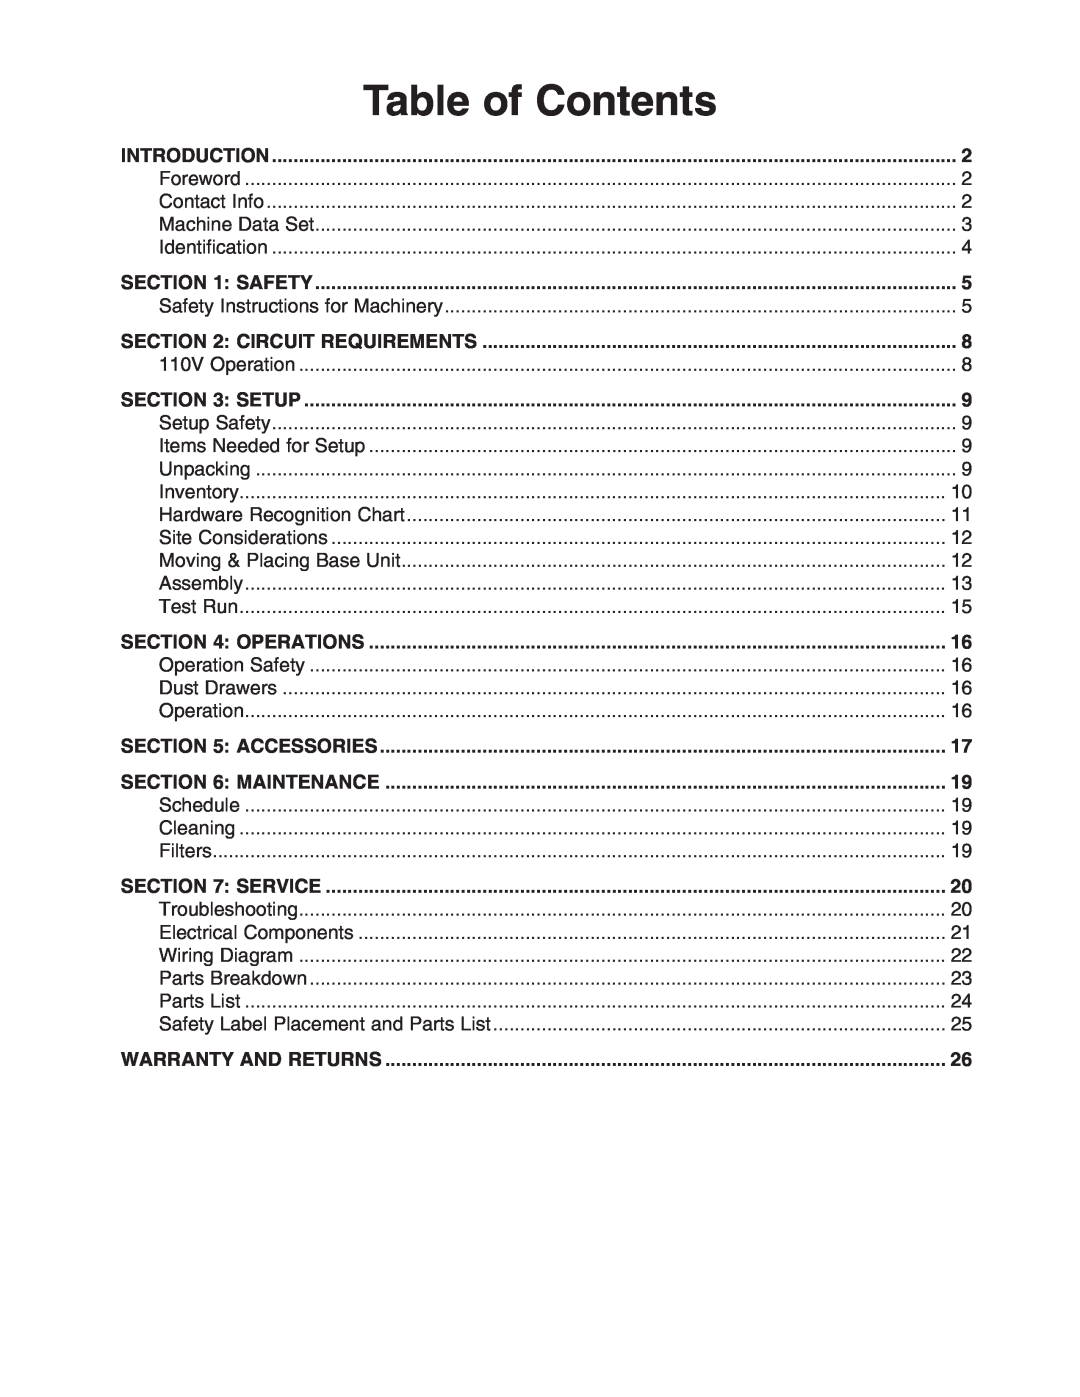 Grizzly G0631 owner manual Table of Contents, Introduction, Safety, Setup, Operations, Accessories, Maintenance, Service 